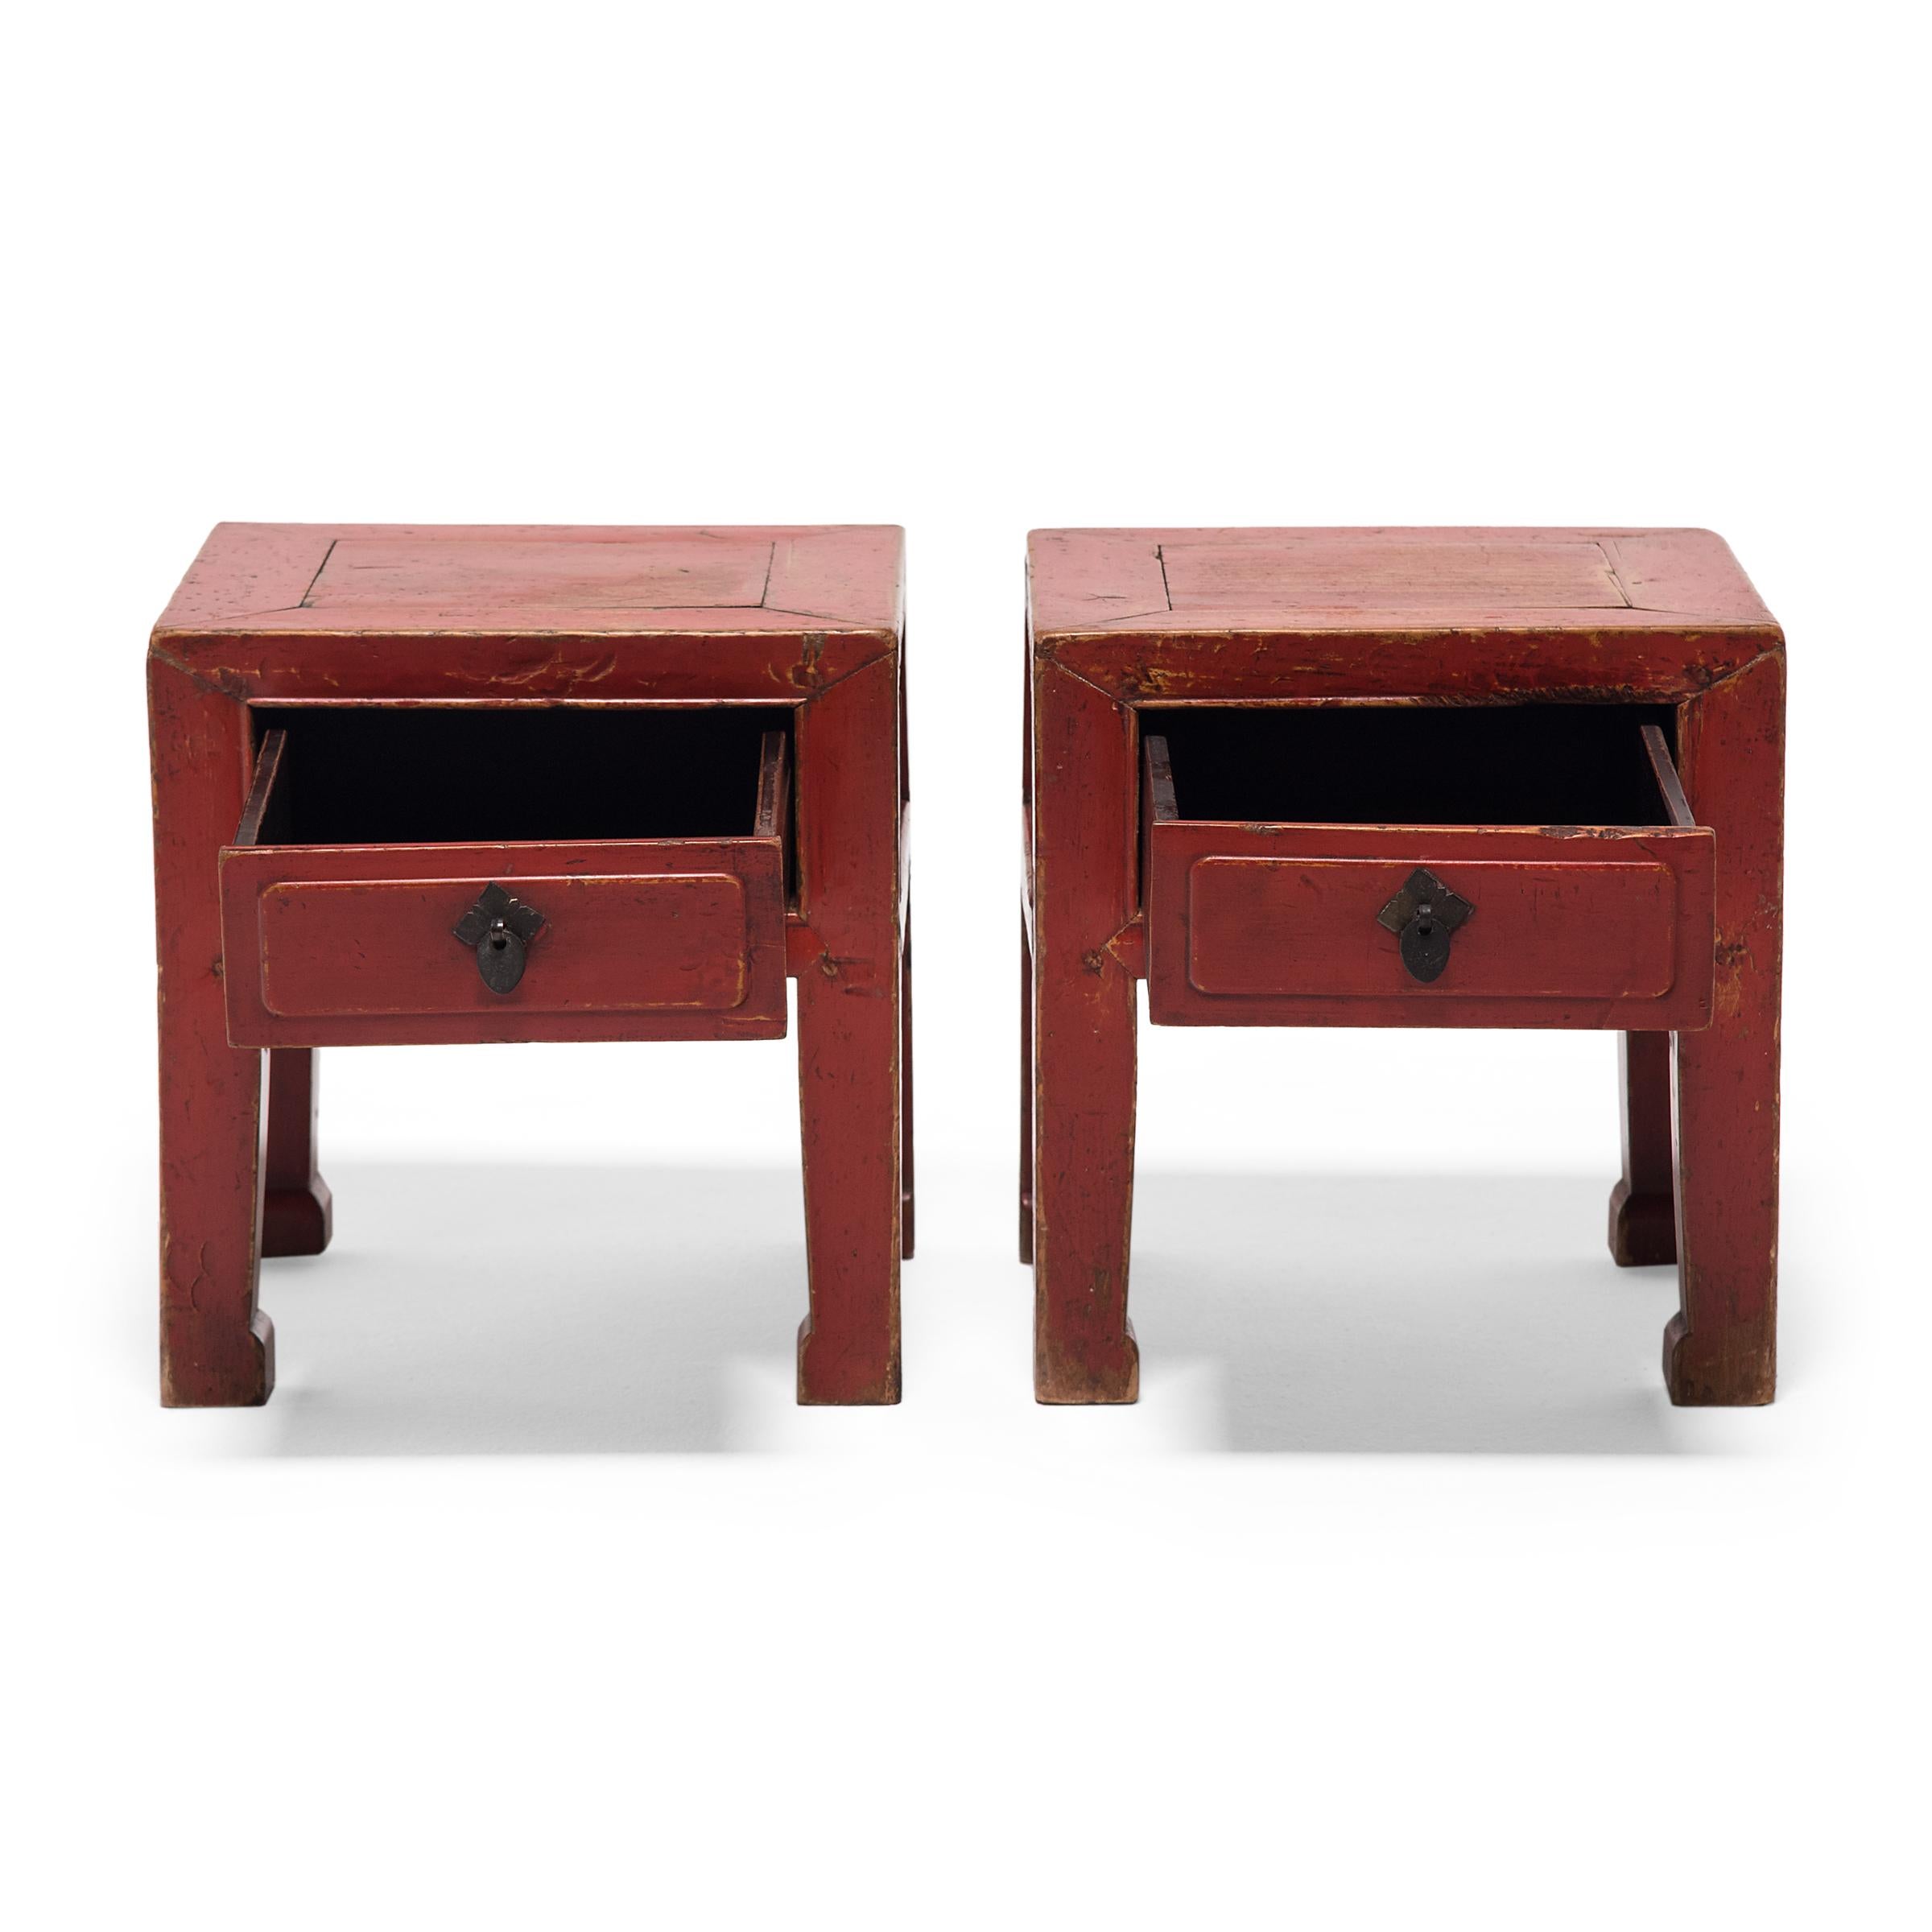 Lacquered Pair of Chinese Petite Red Lacquer Square Stools, c. 1850